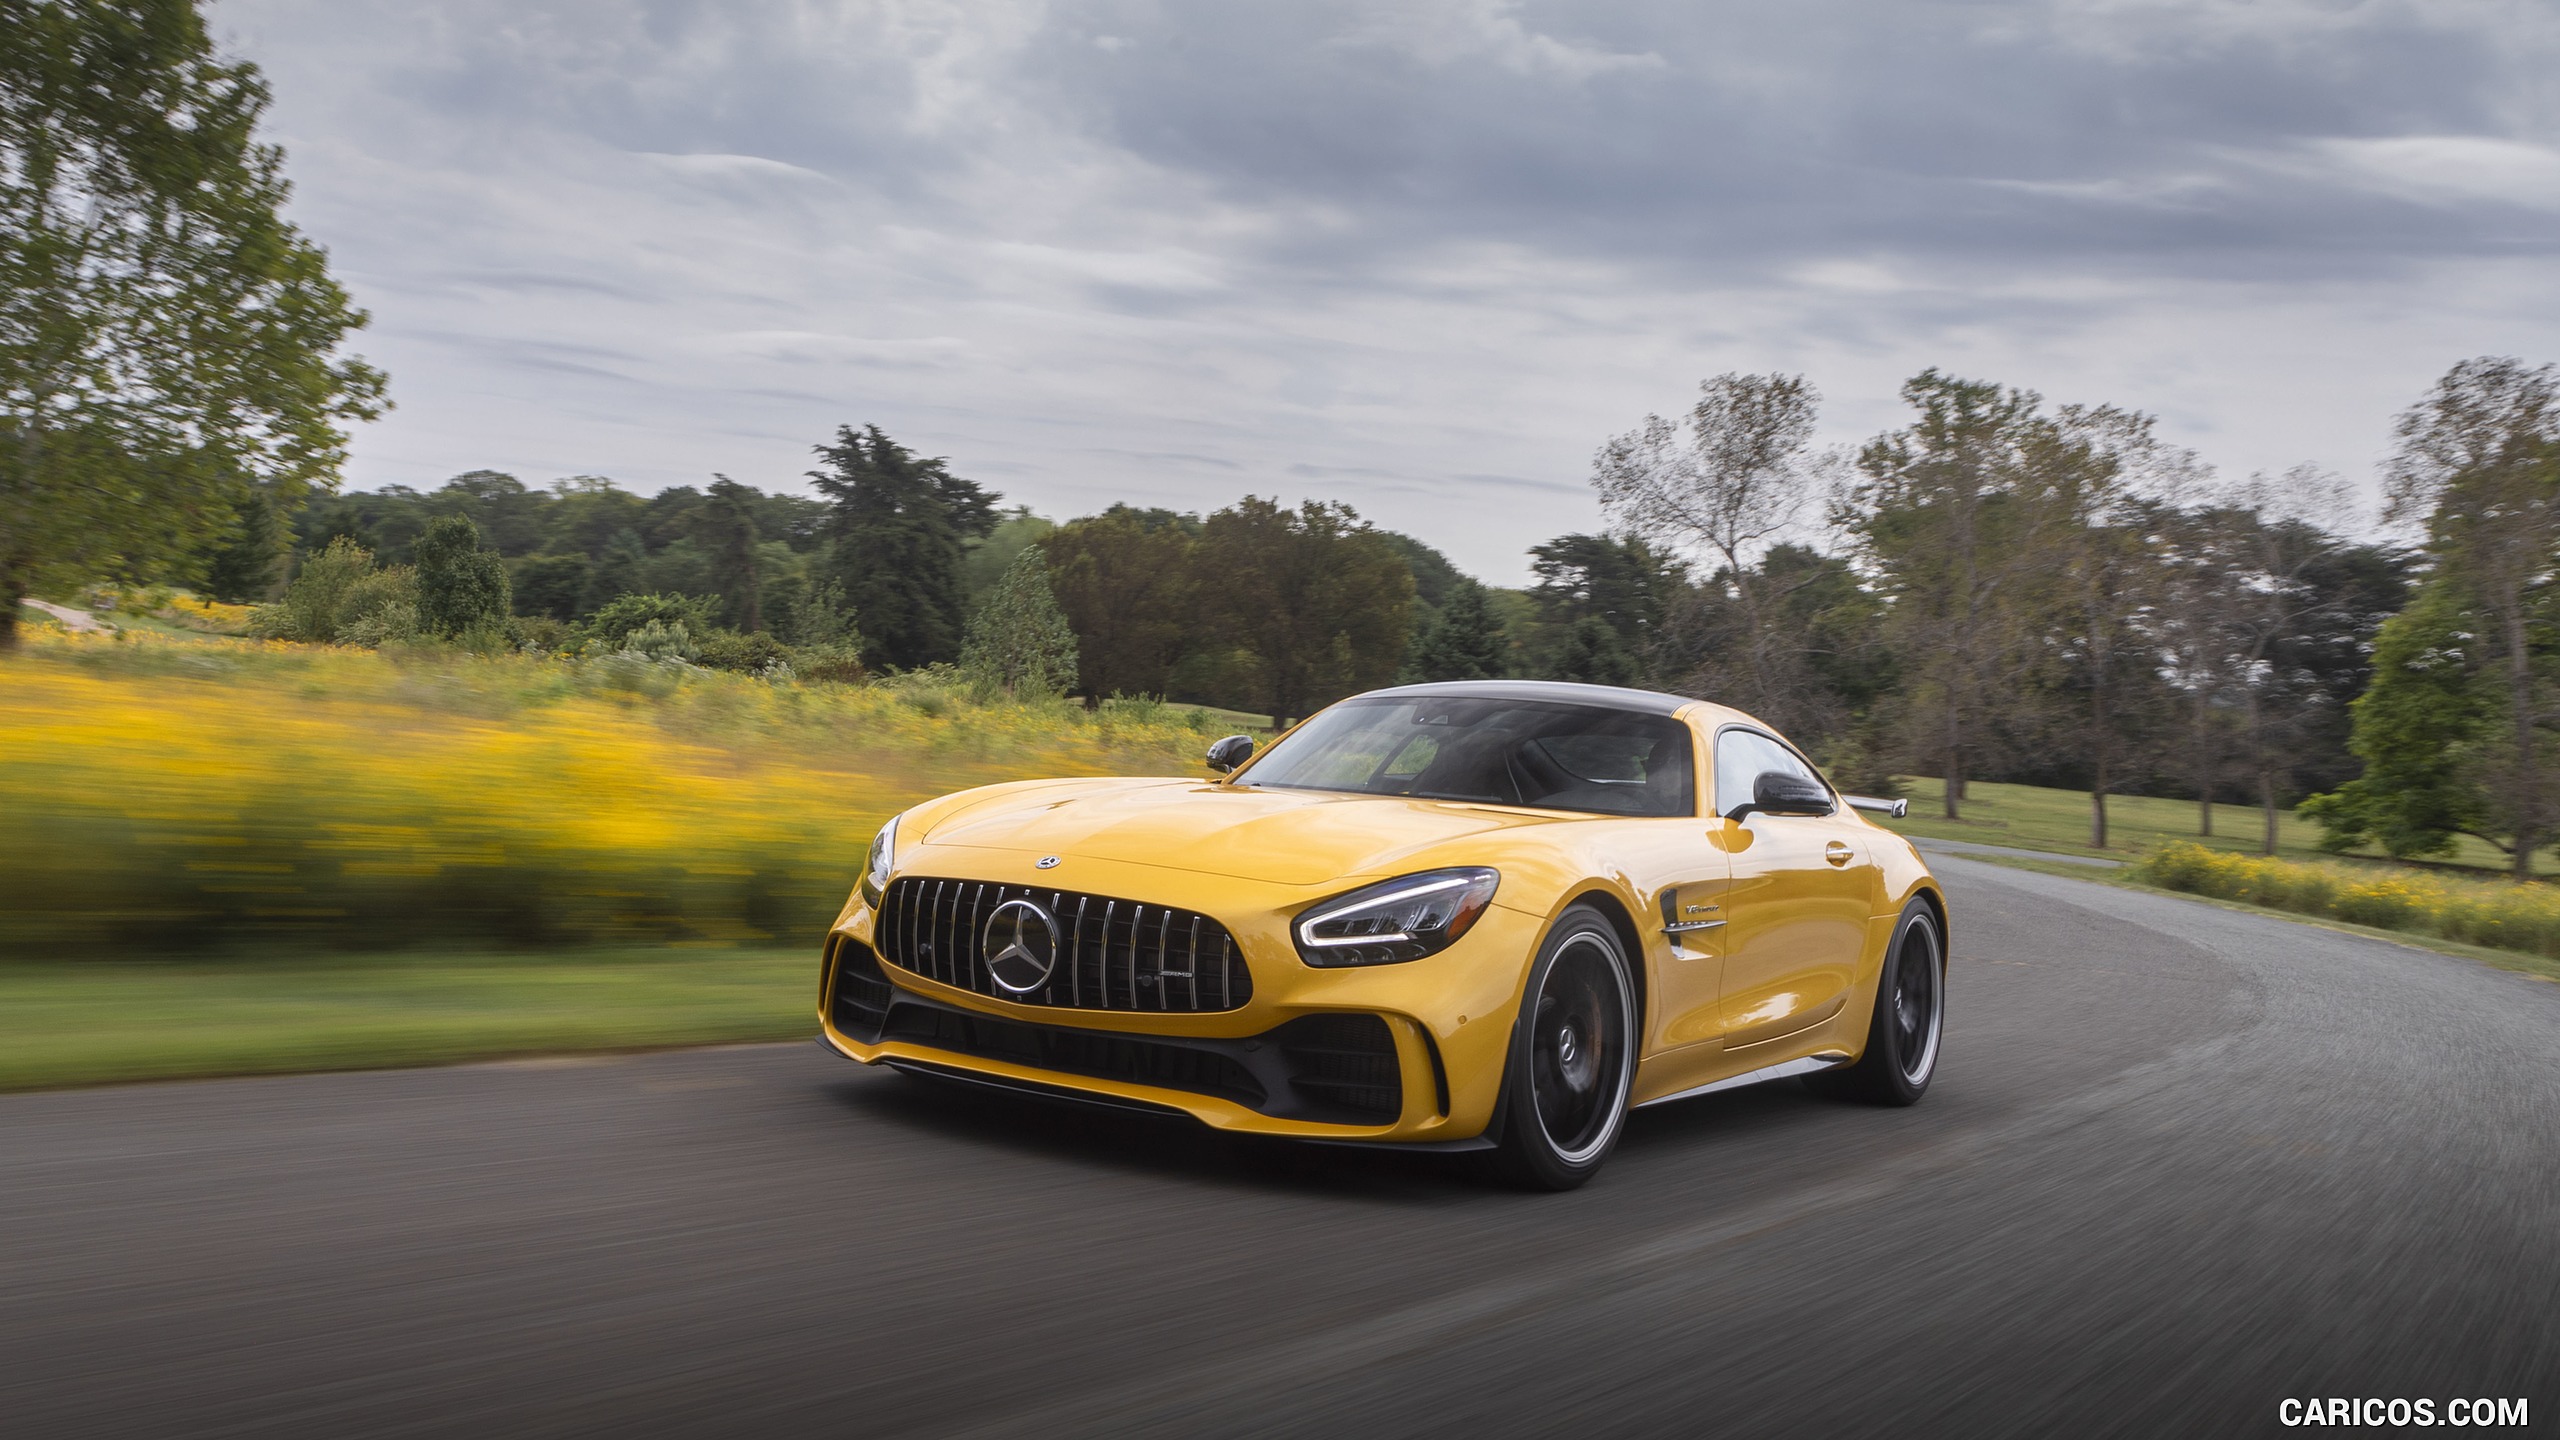 2020 Mercedes-AMG GT R Coupe (US-Spec) - Front Three-Quarter, #246 of 328